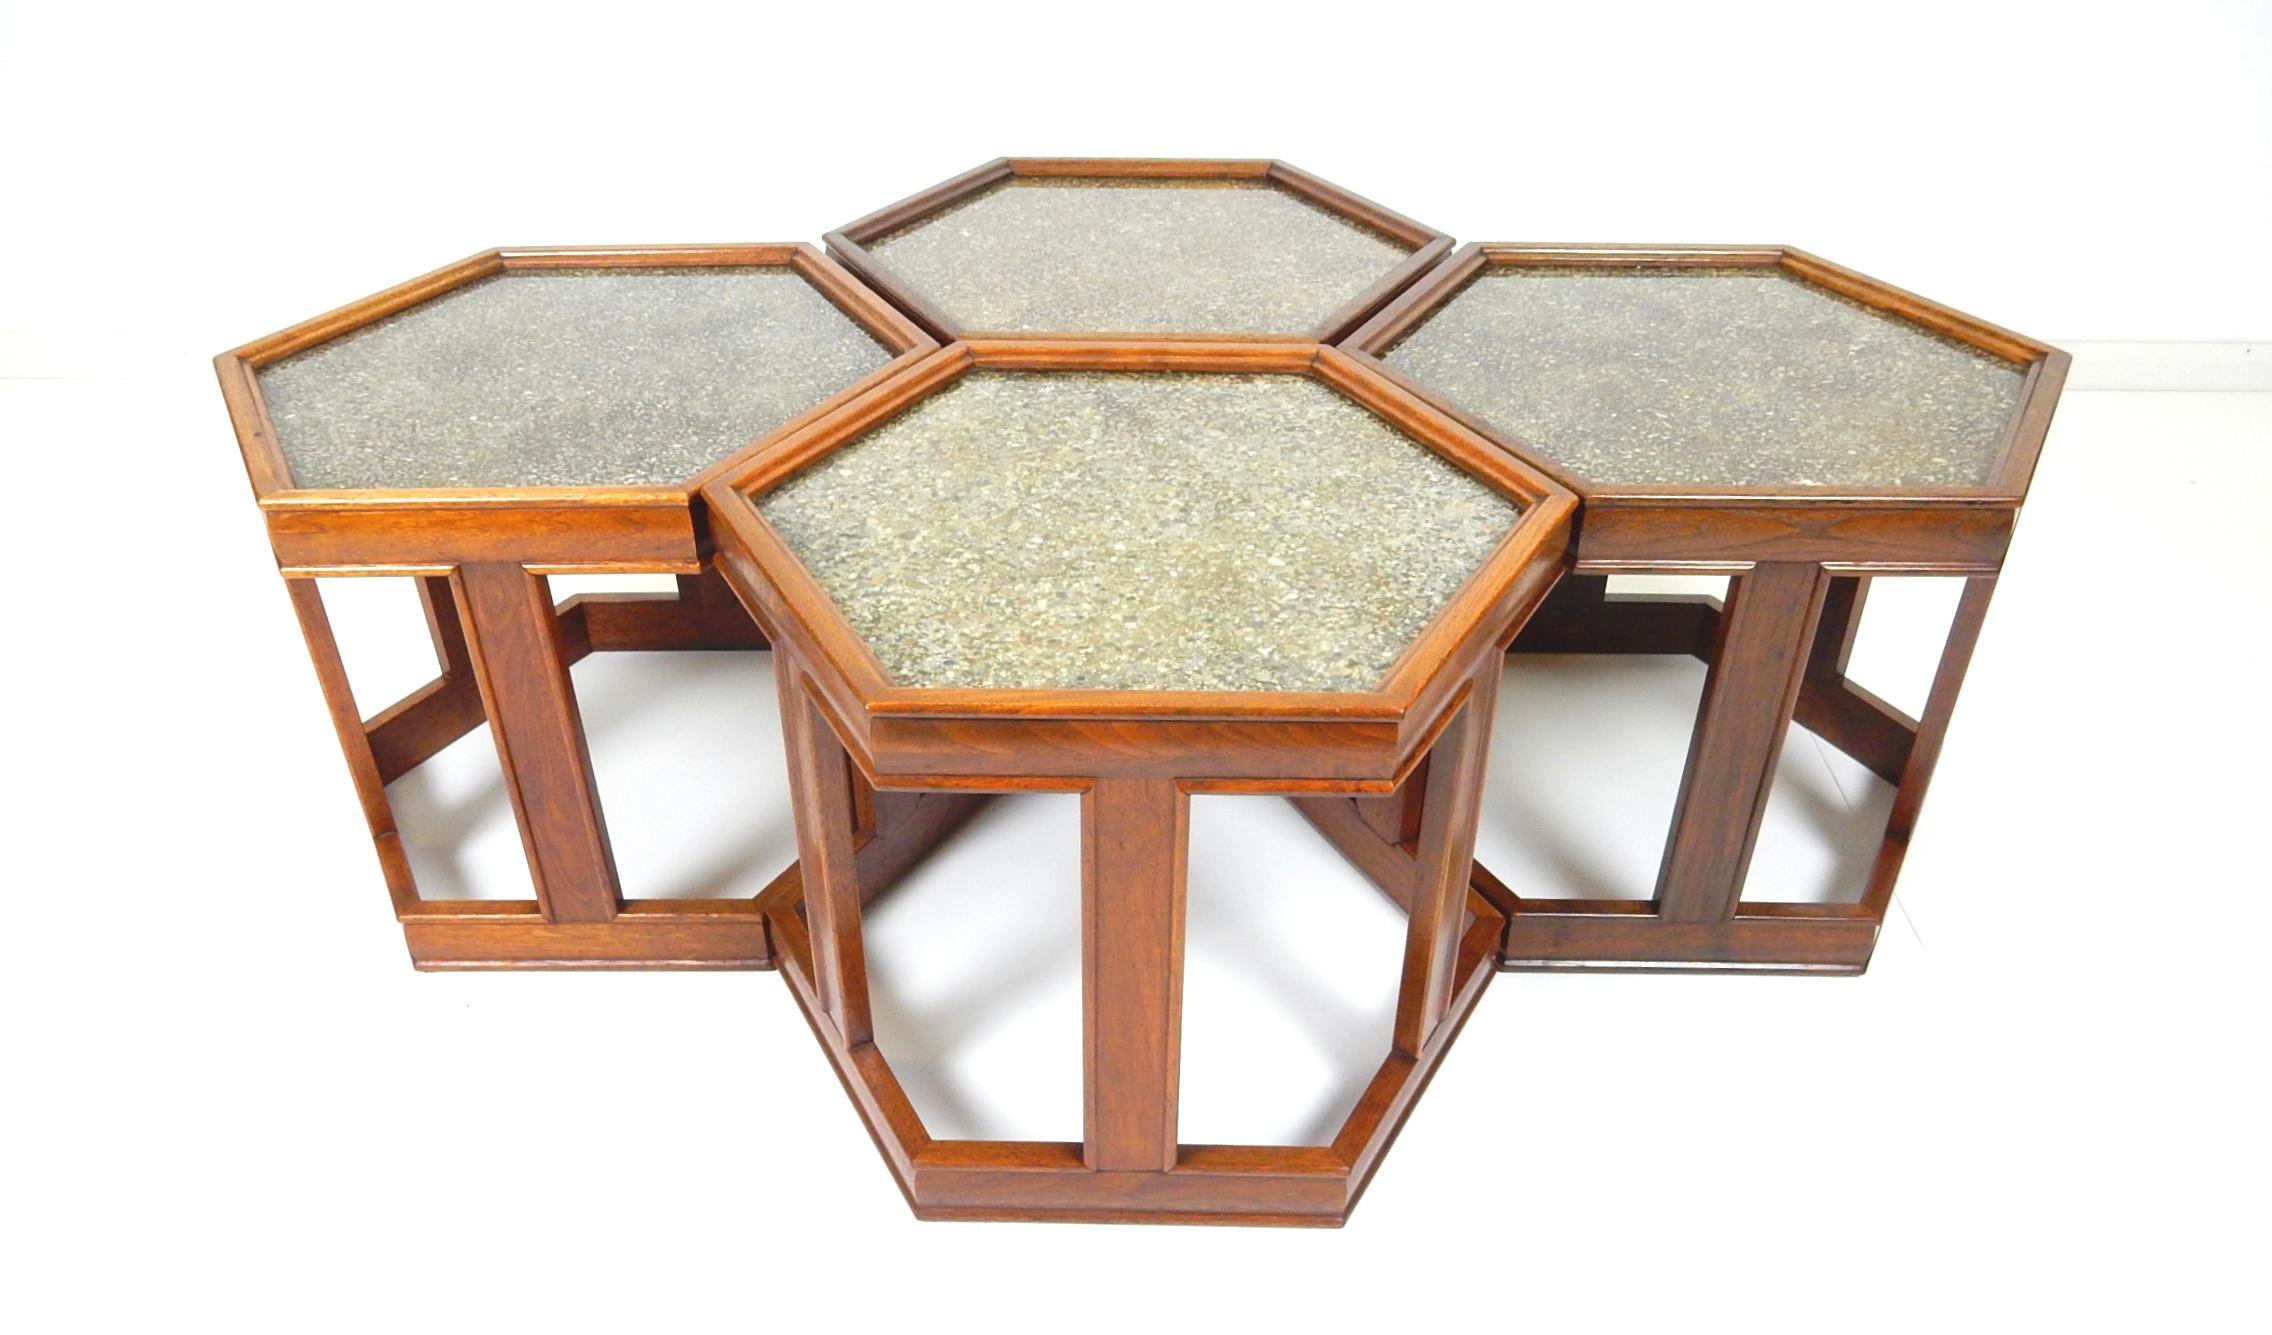 1960s designer John Keal hexagon table set by Brown Saltman .
Set makes a wonderful coffee table that splits into 4 occasional tables.
Walnut bases with gold veined pebble resin tops.
Each marked Brown-Saltman #240.
All in very good solid